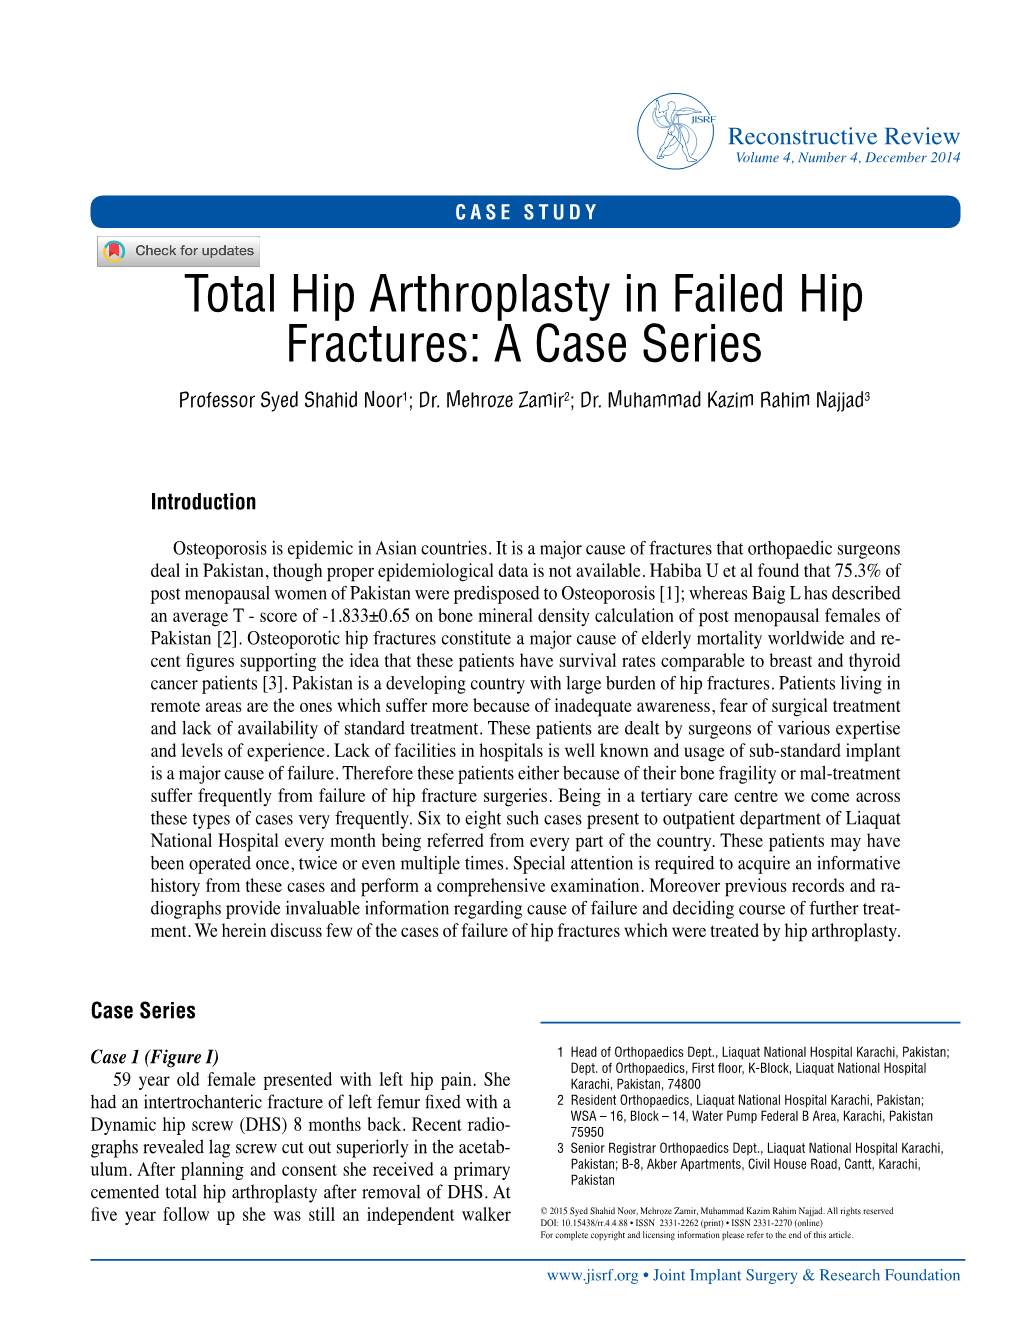 Total Hip Arthroplasty in Failed Hip Fractures: a Case Series Professor Syed Shahid Noor1; Dr